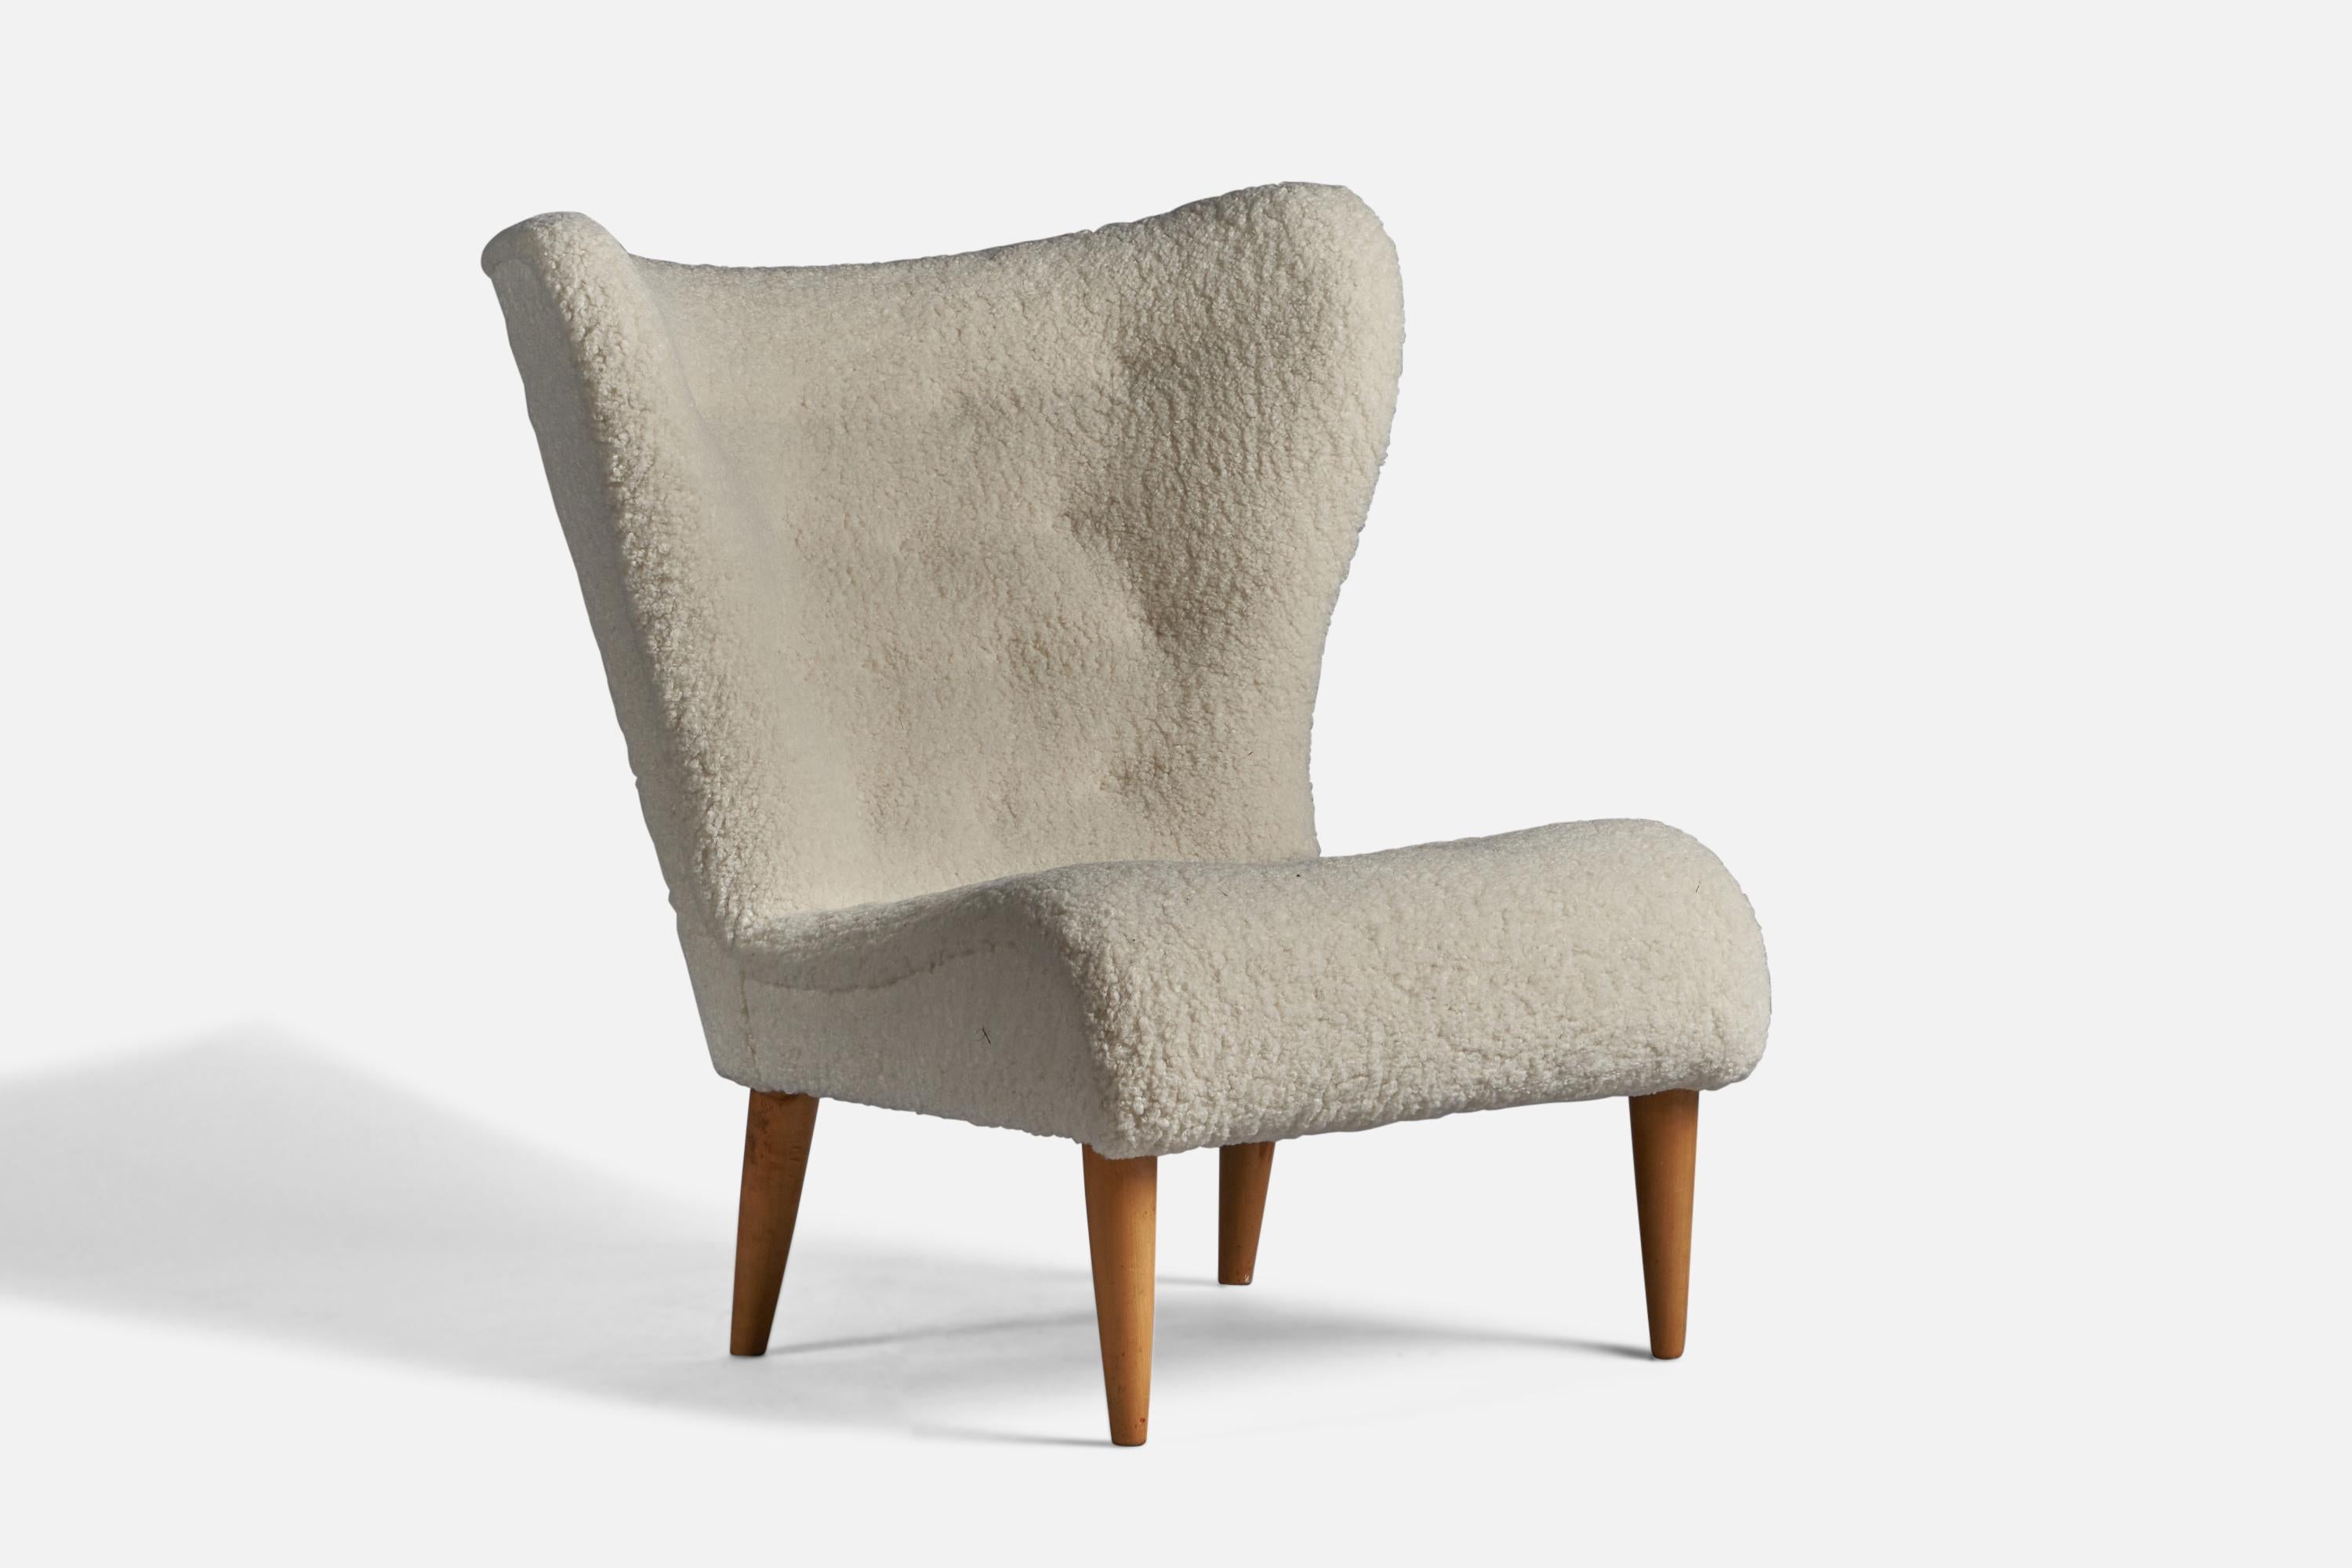 A white bouclé and wood lounge chair or slipper chair designed and produced in Sweden, 1940s.

15